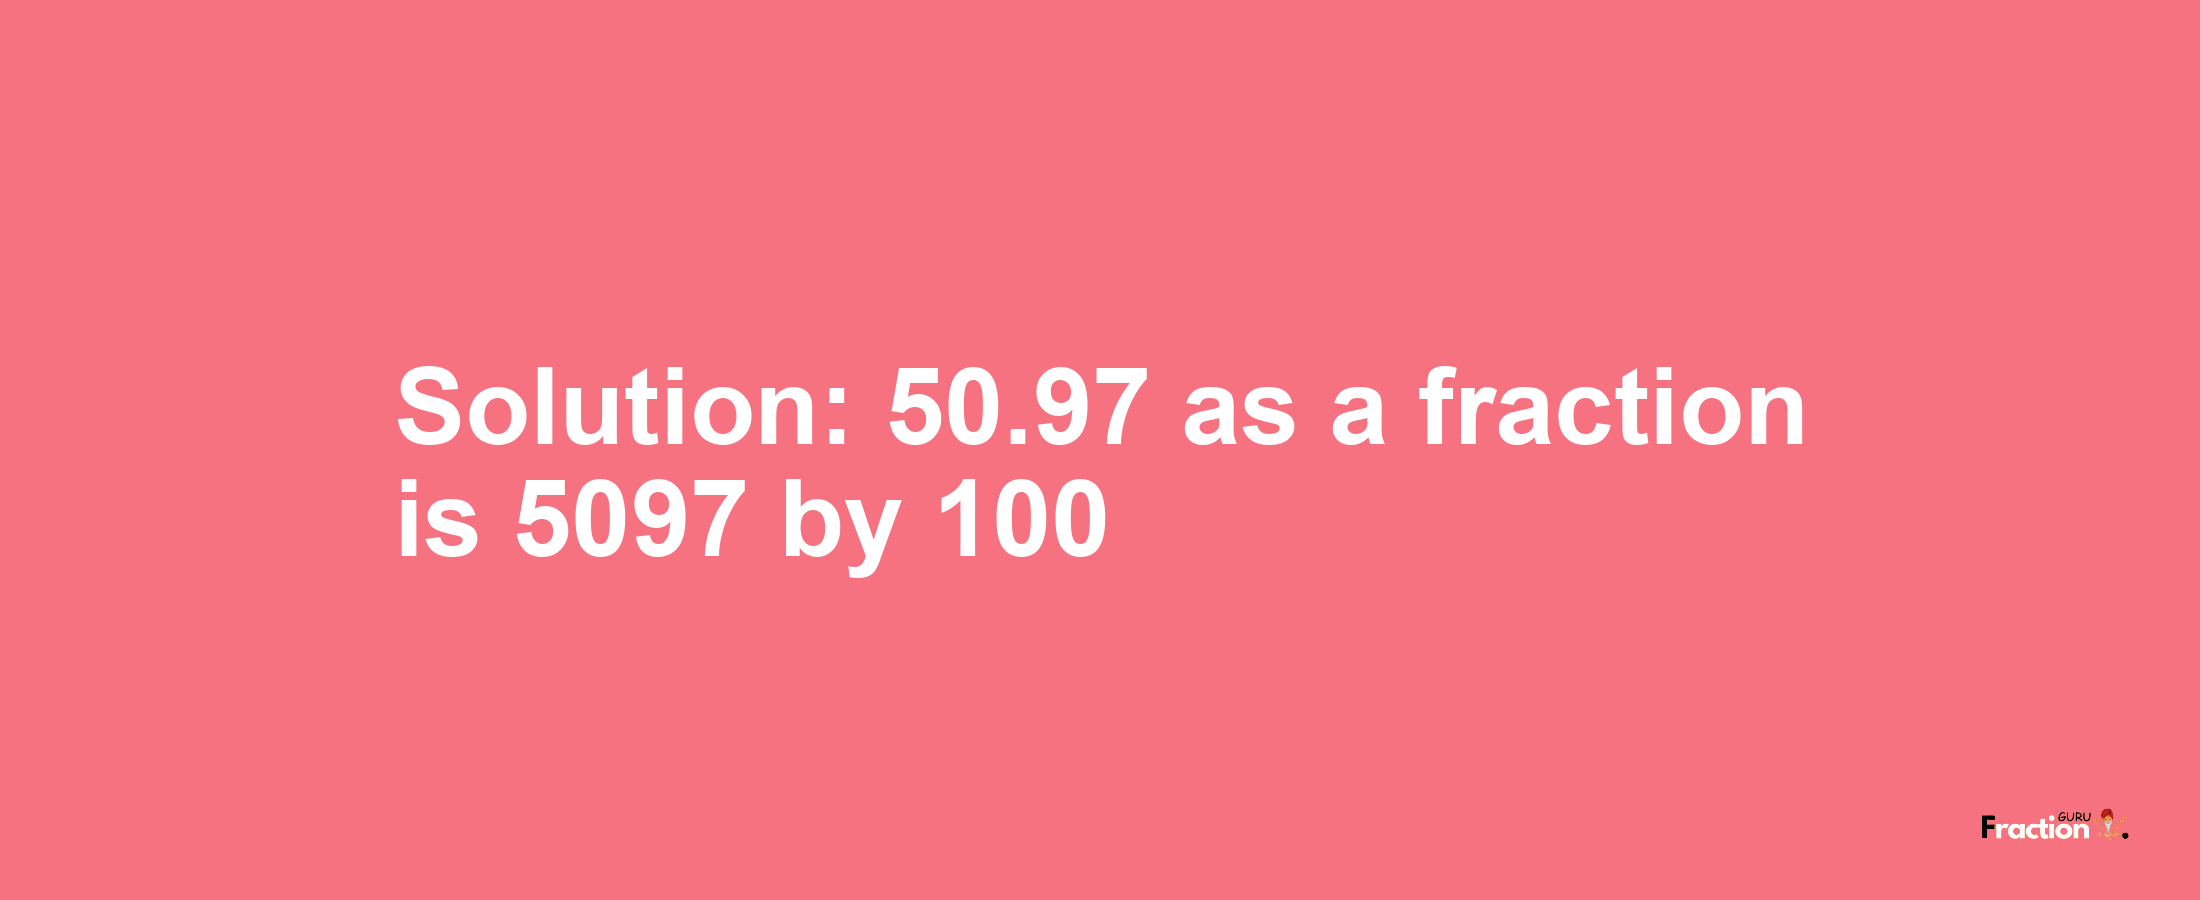 Solution:50.97 as a fraction is 5097/100